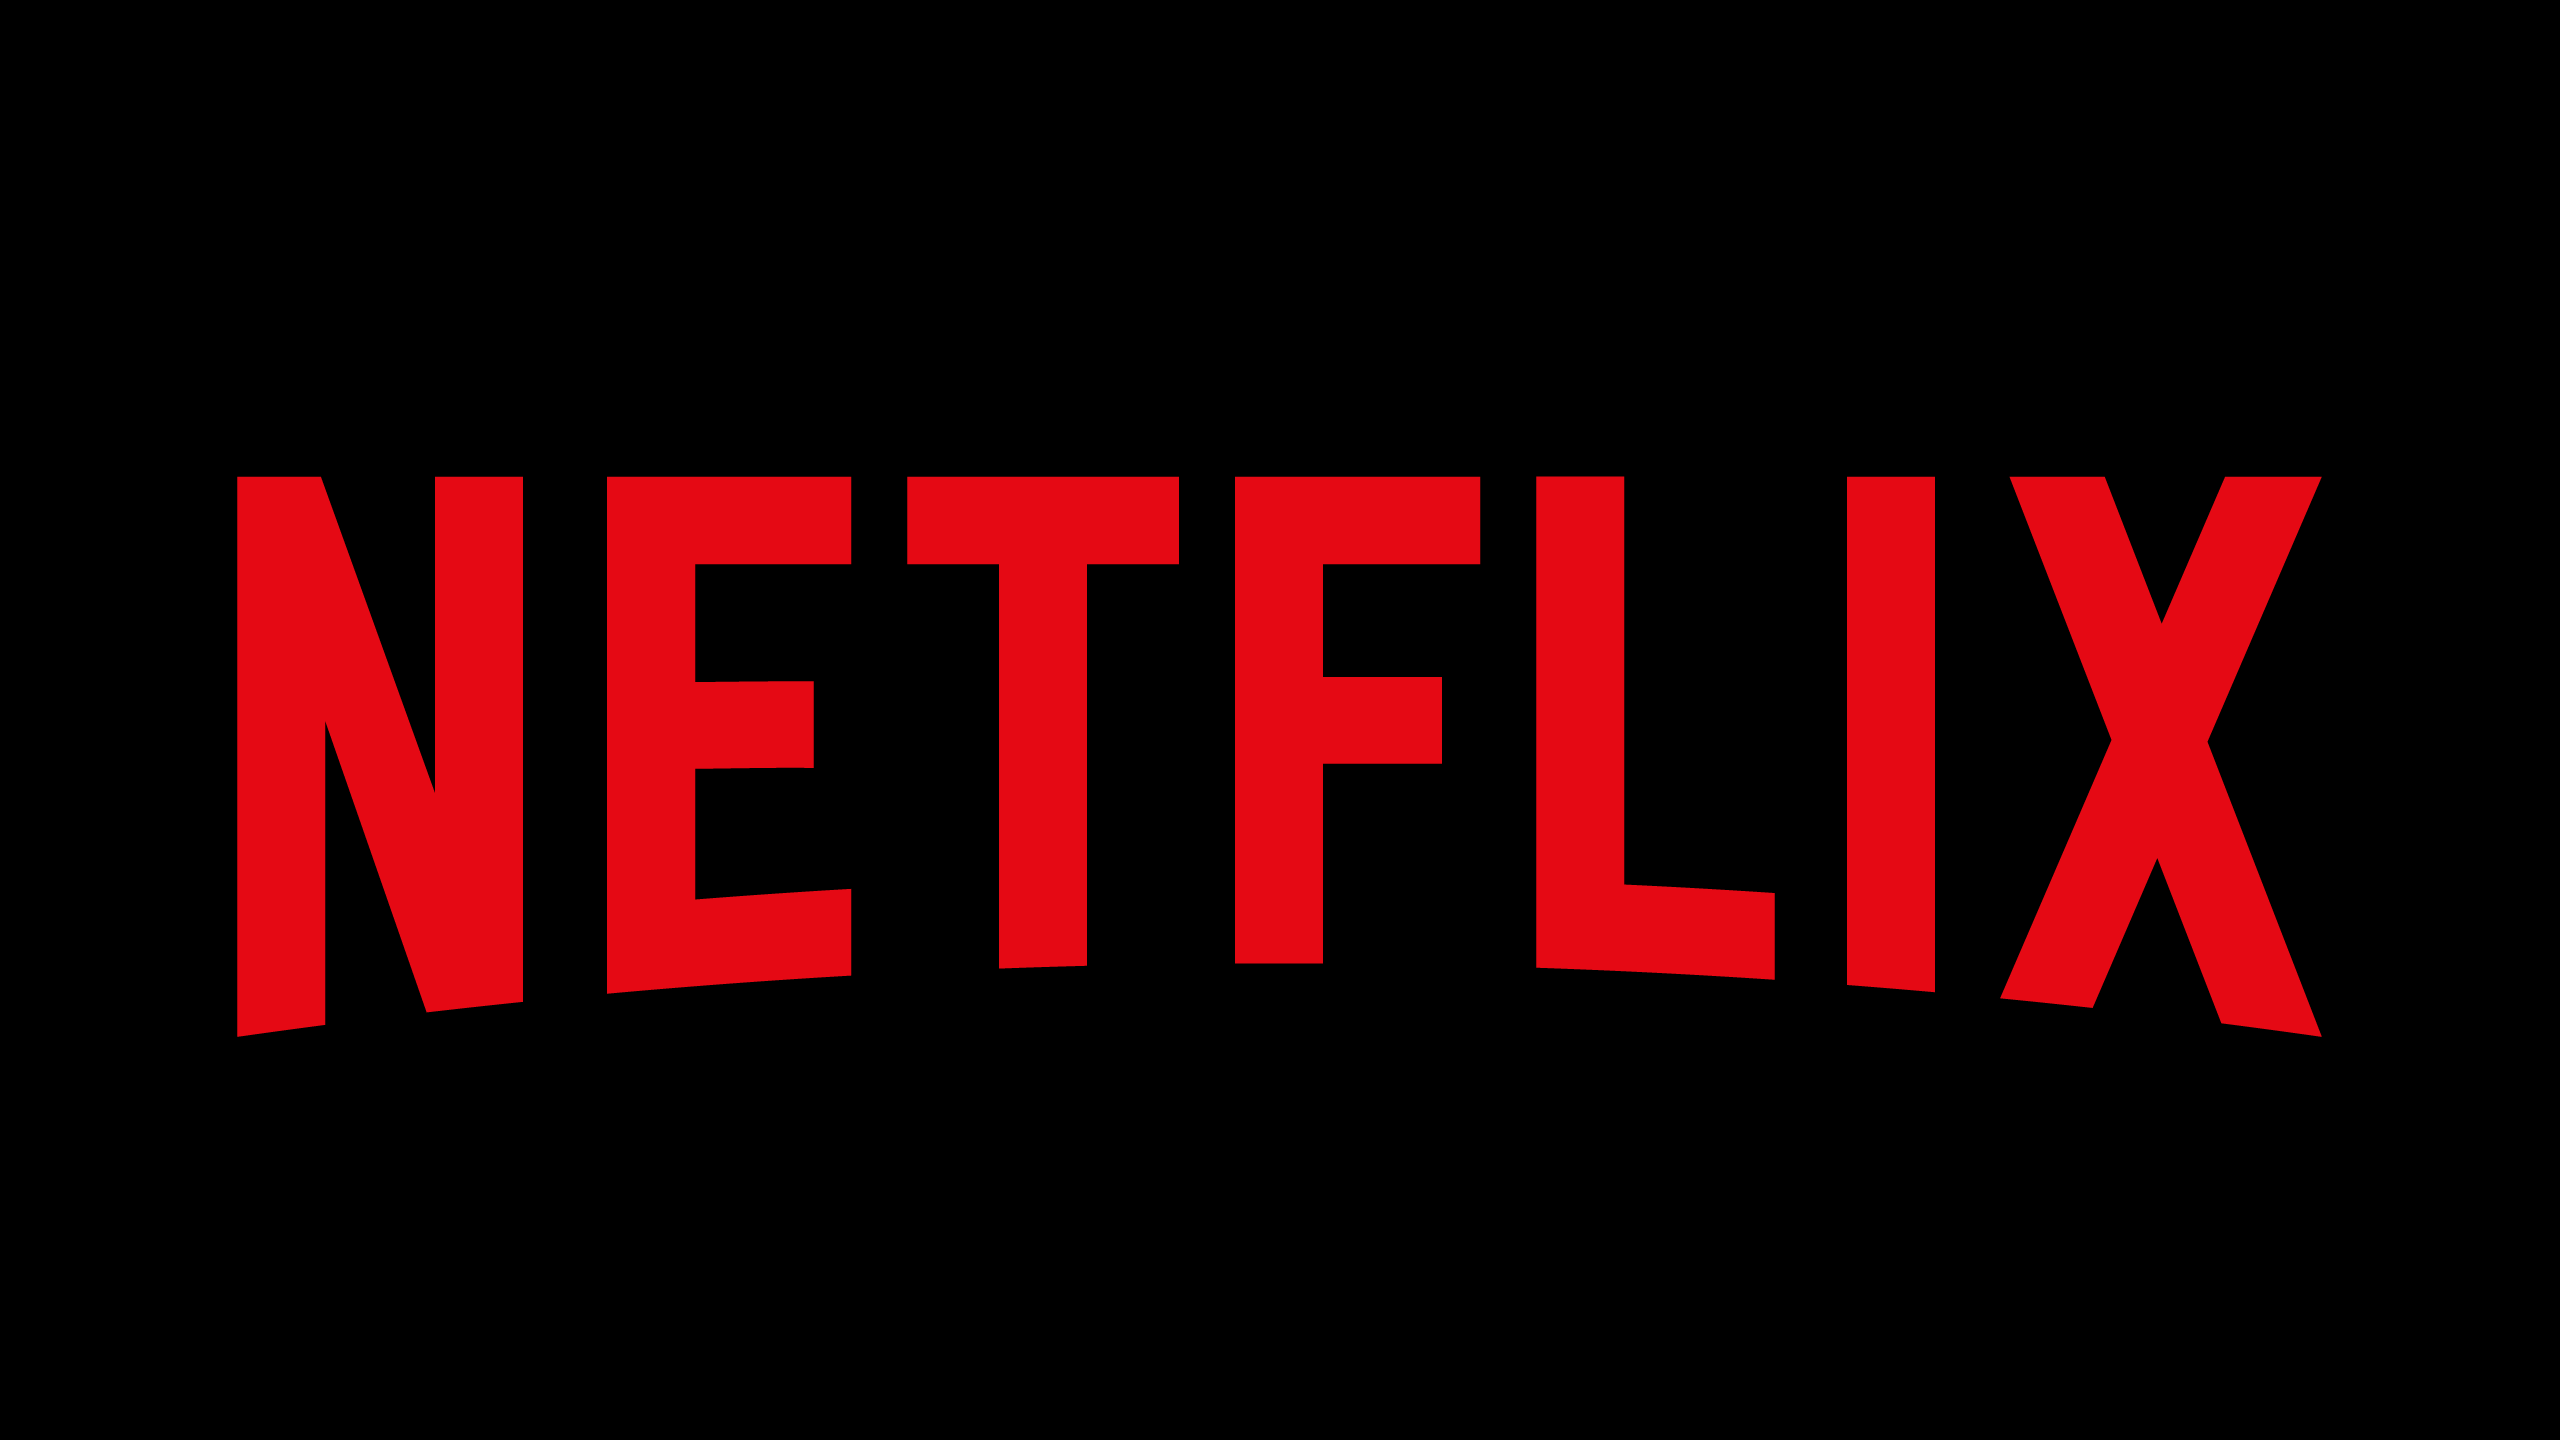 Illustration diagram displaying Netflix which has witnessed successful web localization